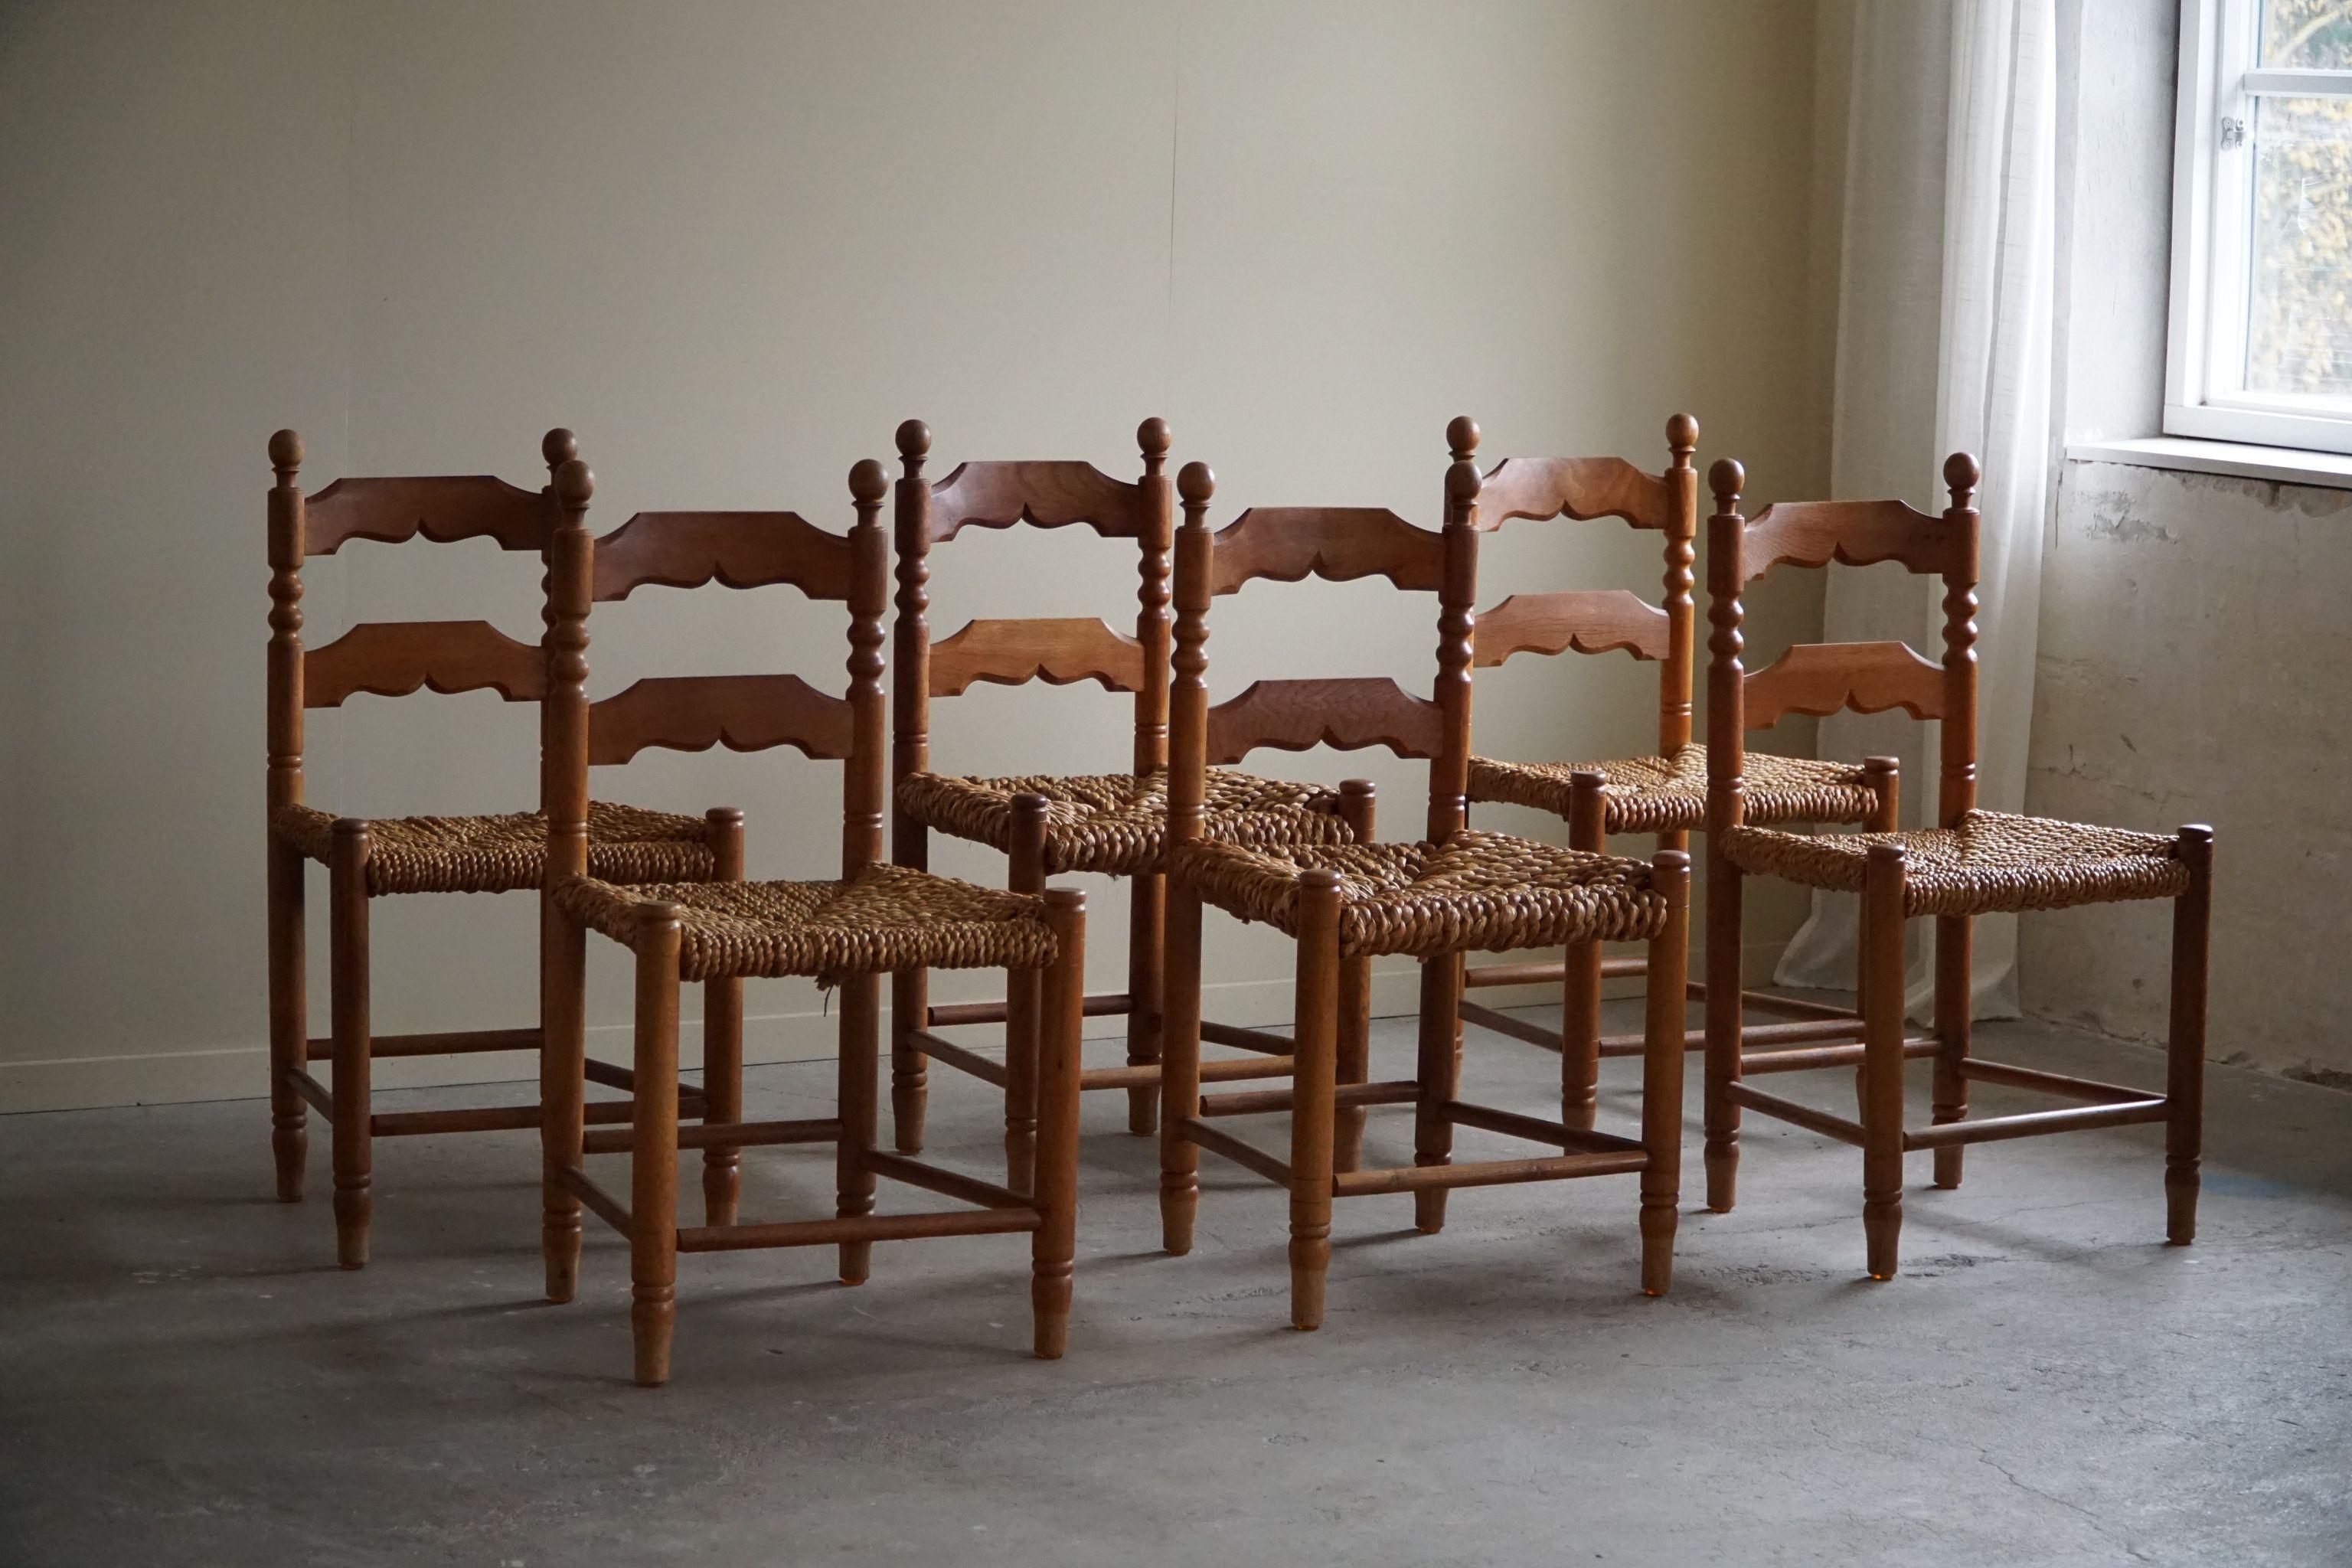 Set of 6 brutalist dining chairs in solid oak & hand woven seats of seagrass(notice 2 types of seagrass). Made by a French cabinetmaker in the 1950s. A great sculptural design that match many interior styles. 

These chairs are in a good vintage